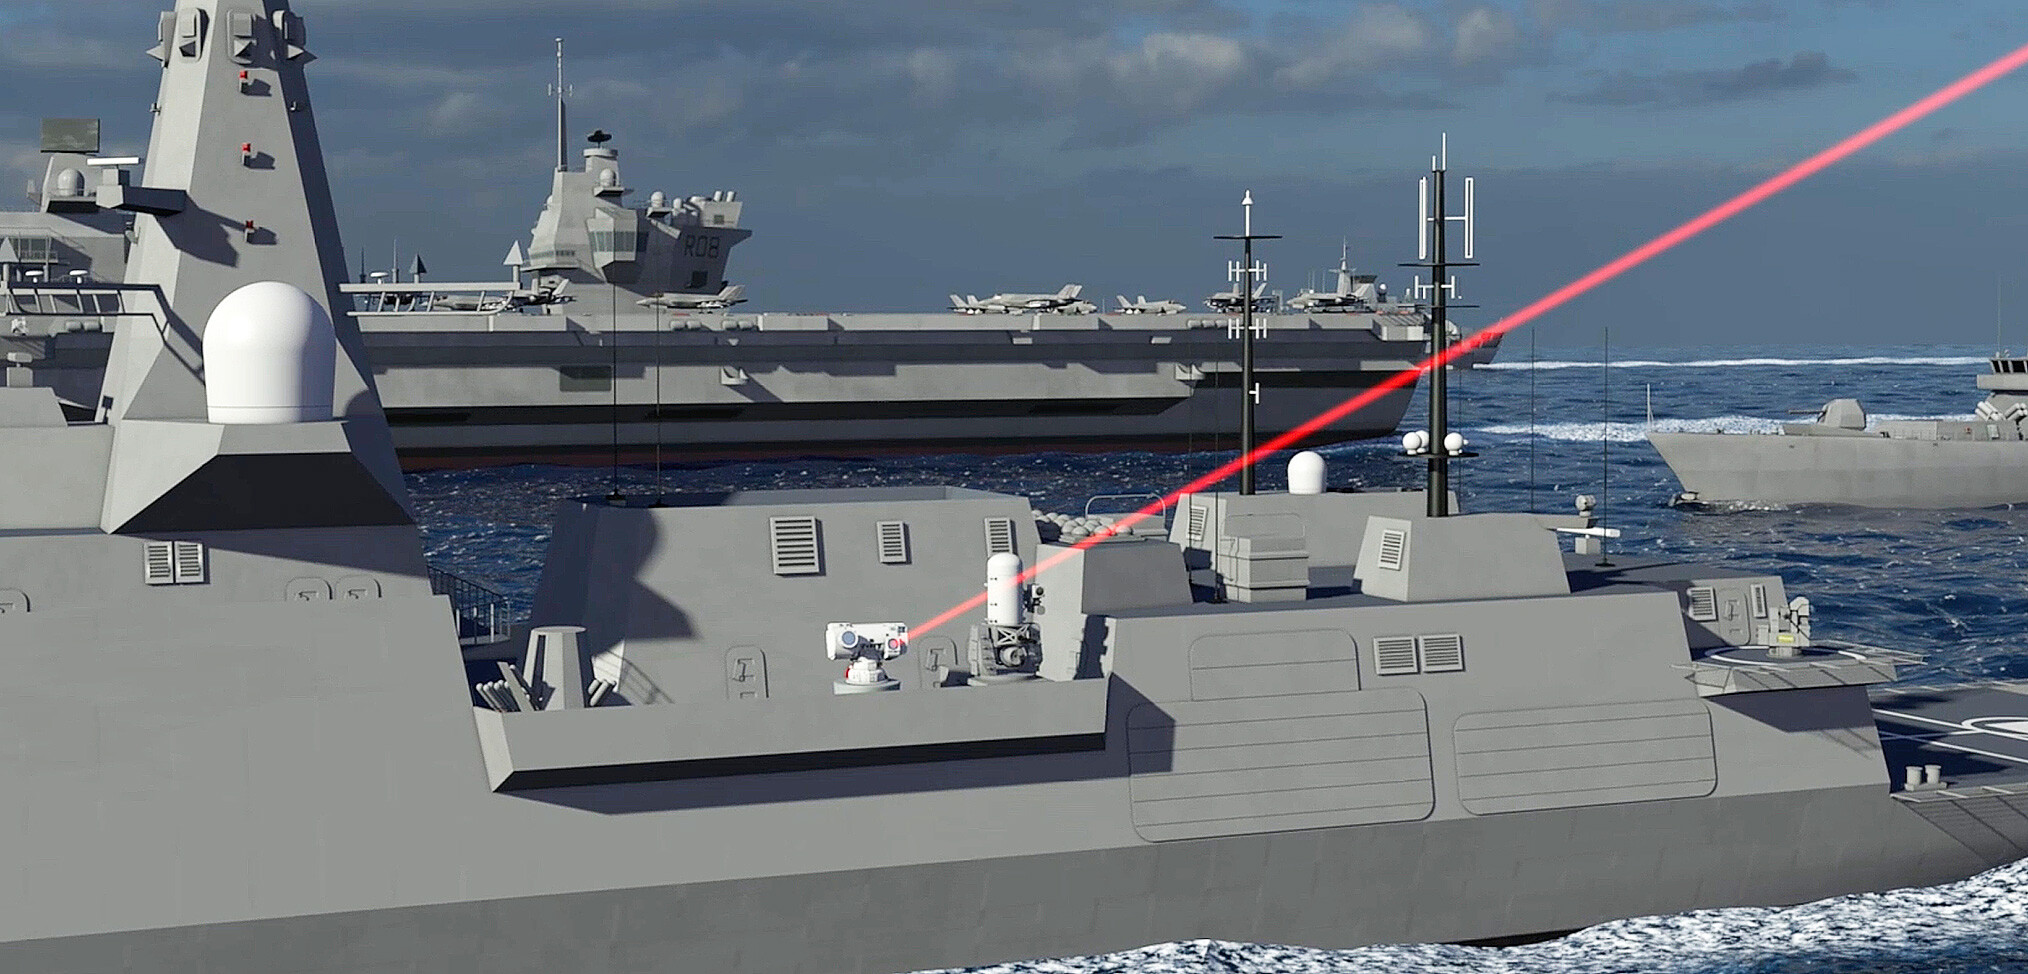 DragonFire – pathway to a Laser Directed Energy Weapon for the Royal Navy?